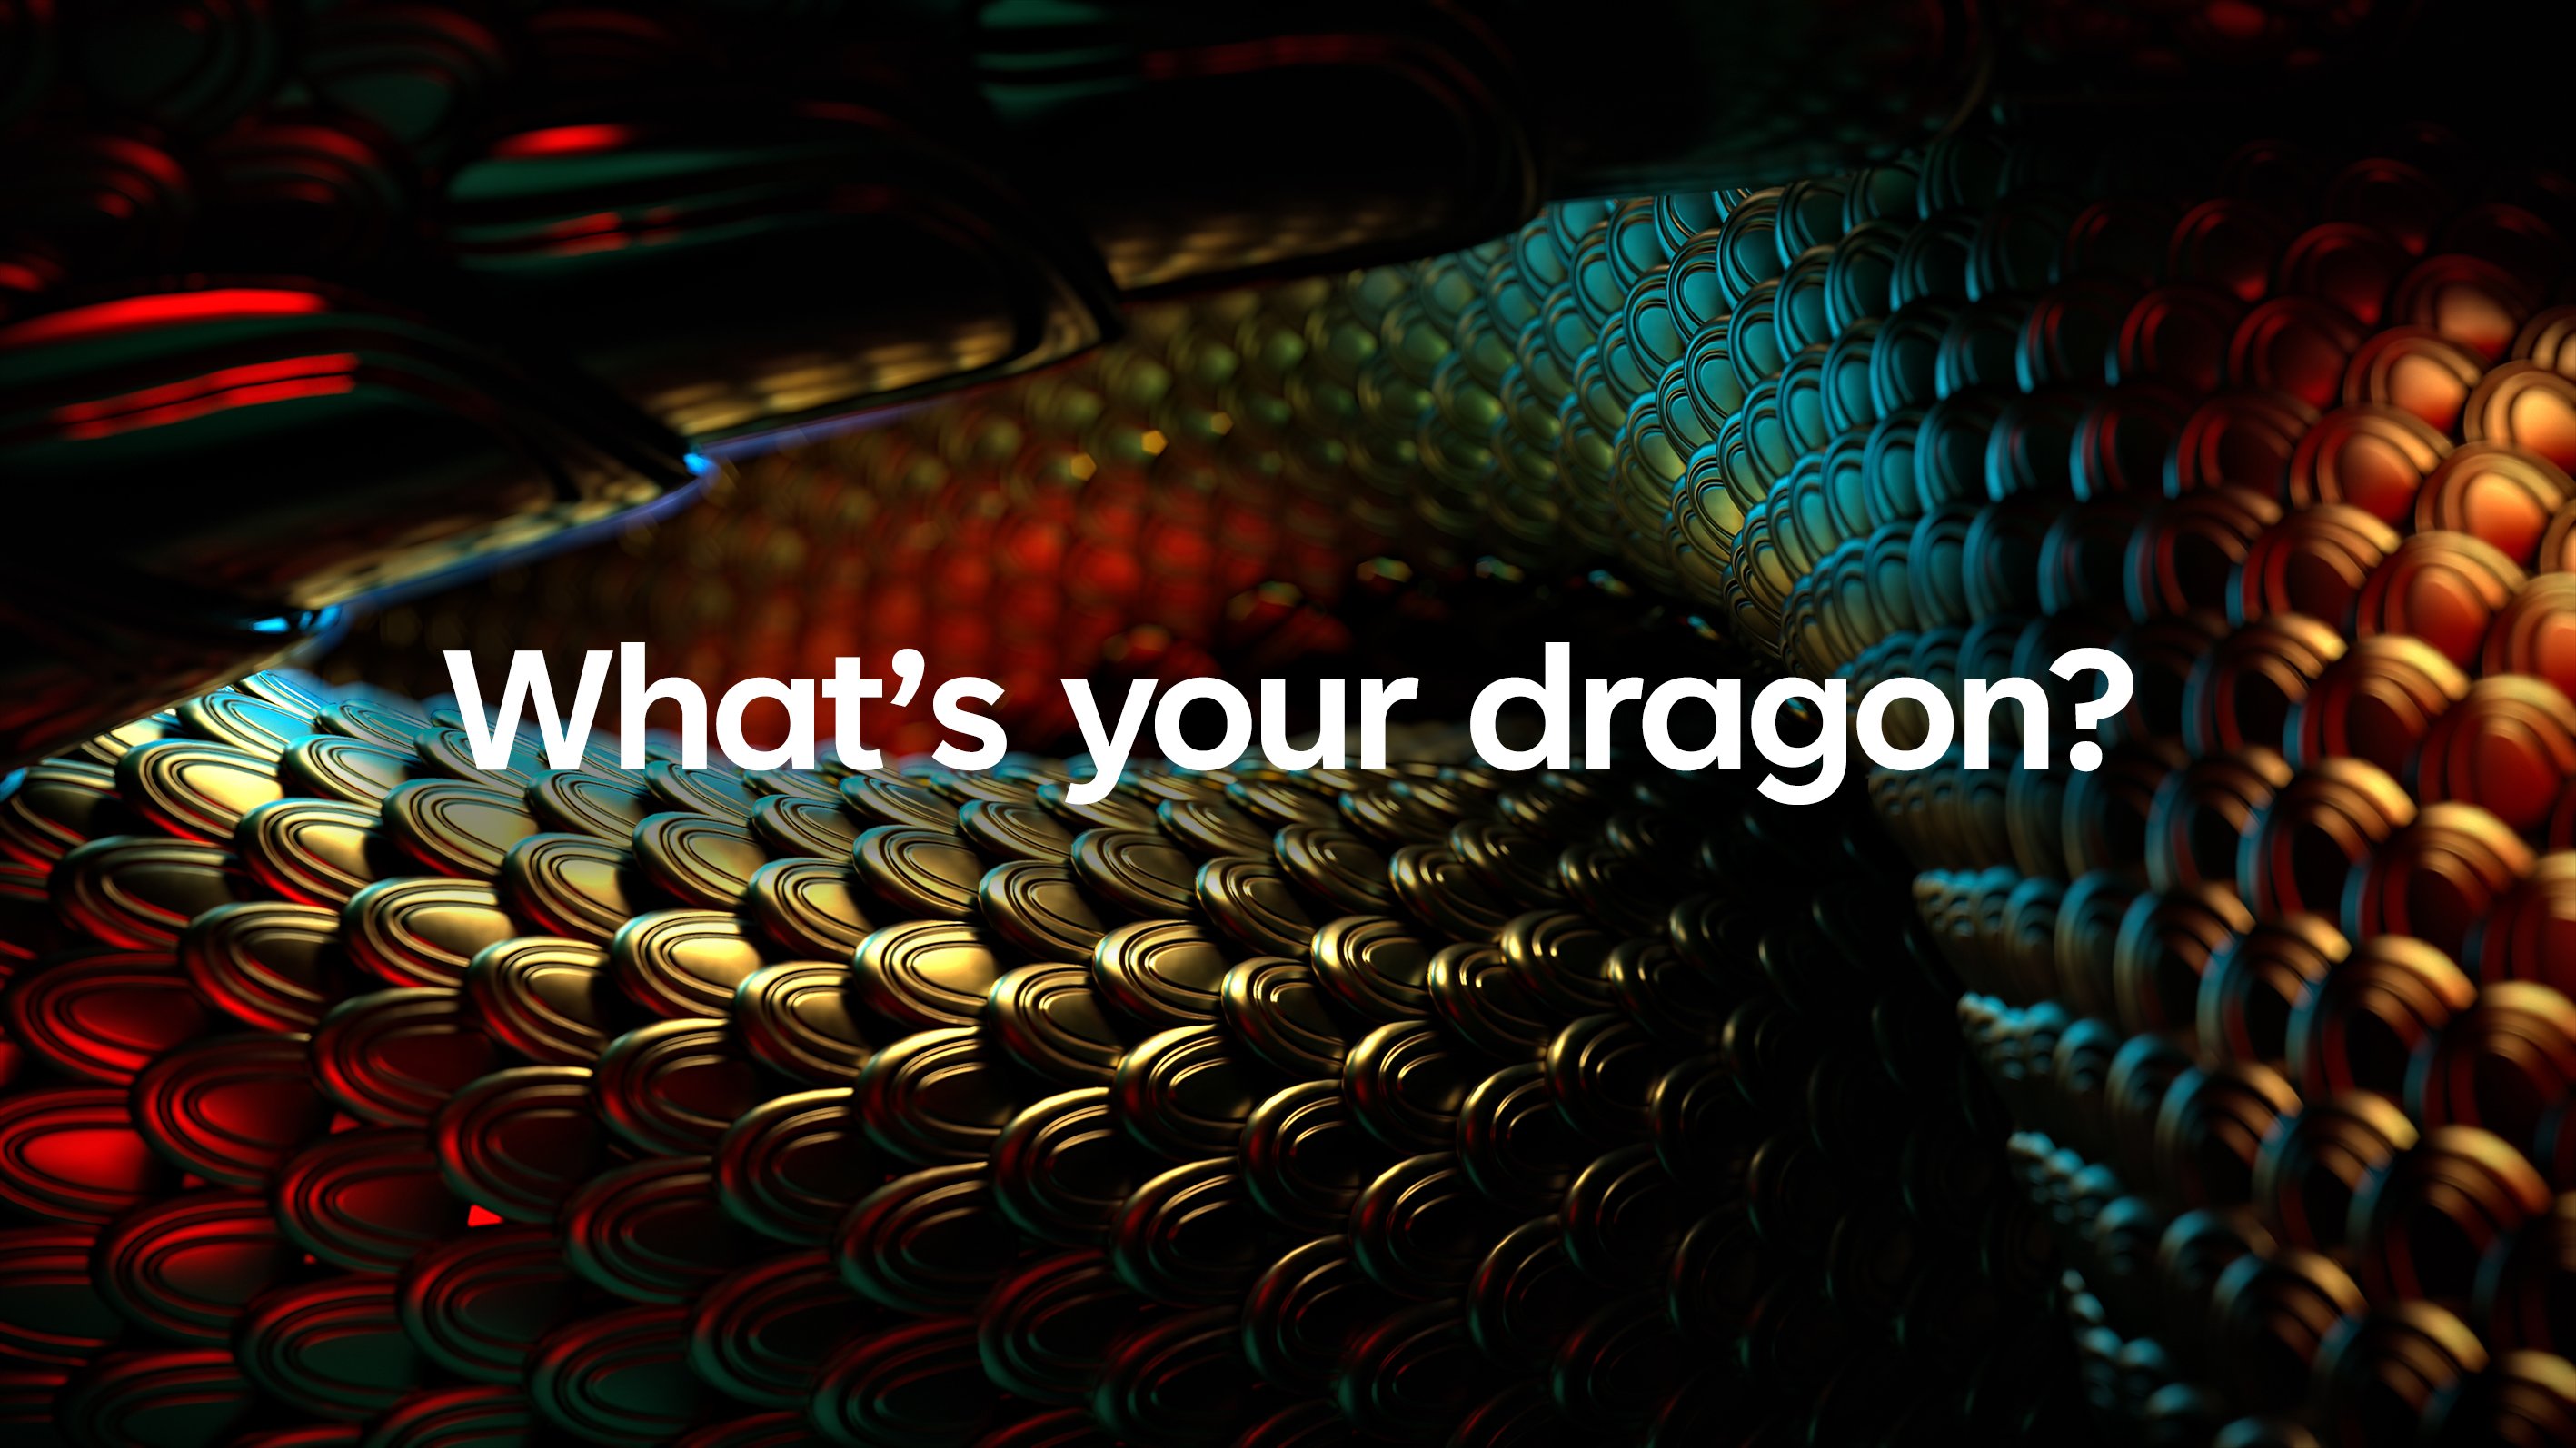 What's your dragon?